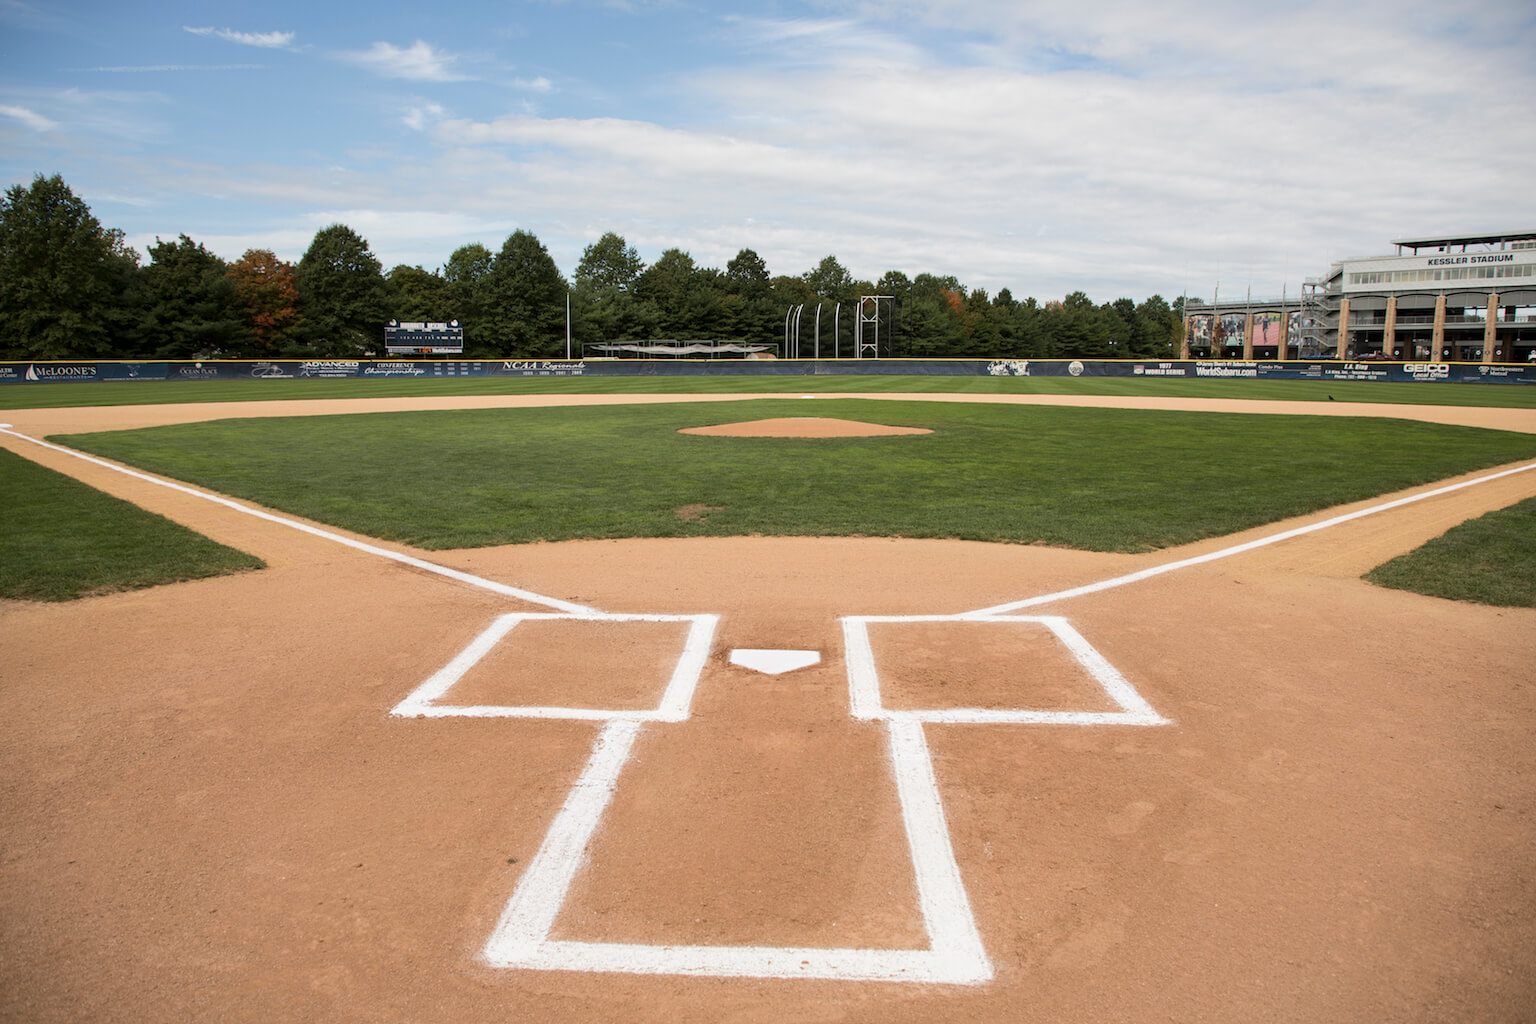 Photo from home plate in the baseball field